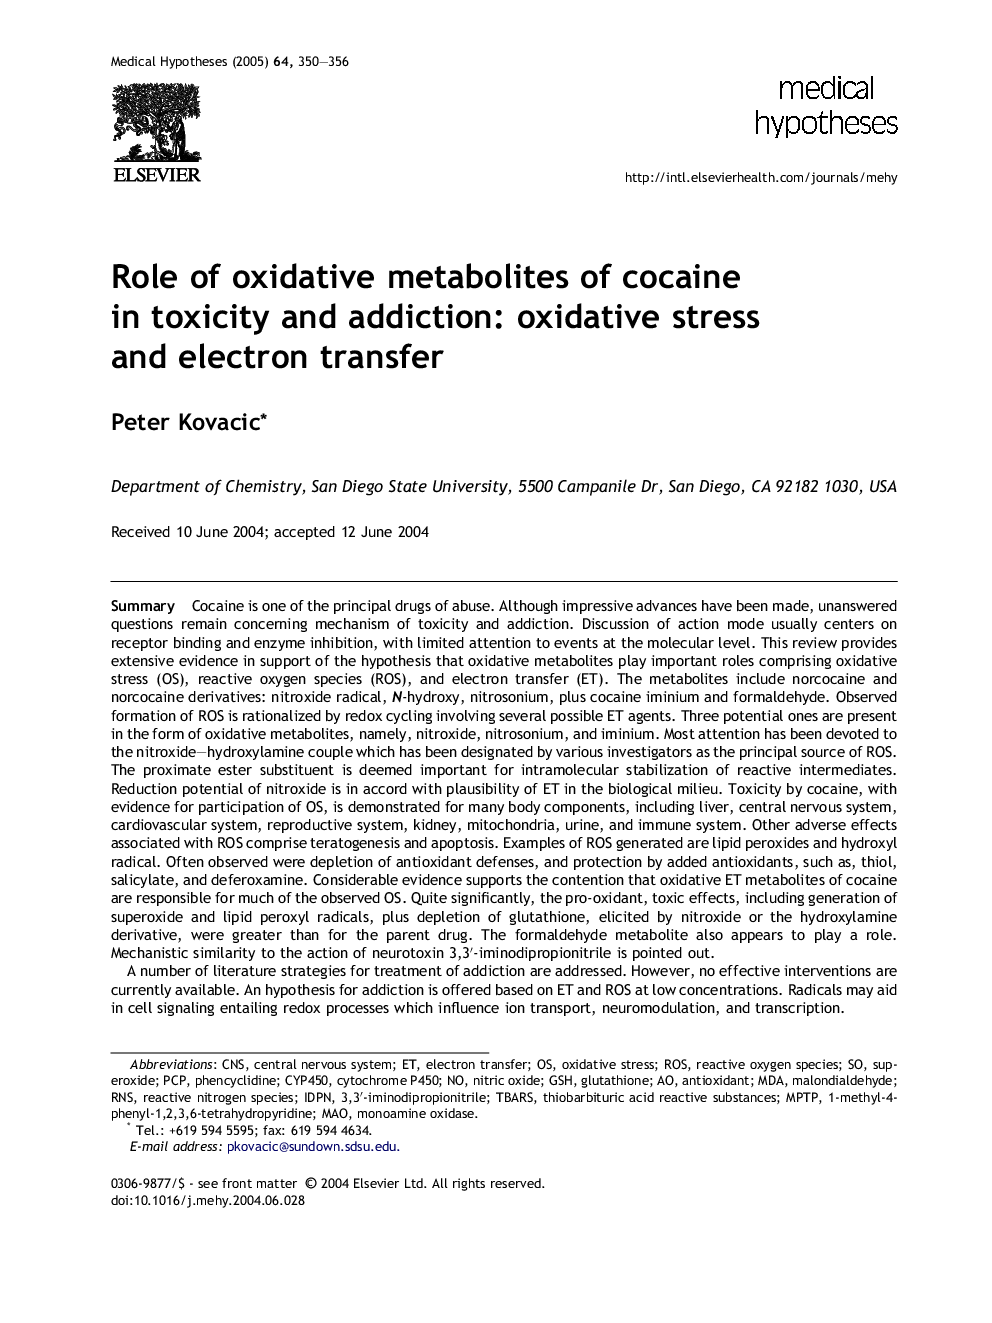 Role of oxidative metabolites of cocaine in toxicity and addiction: oxidative stress and electron transfer